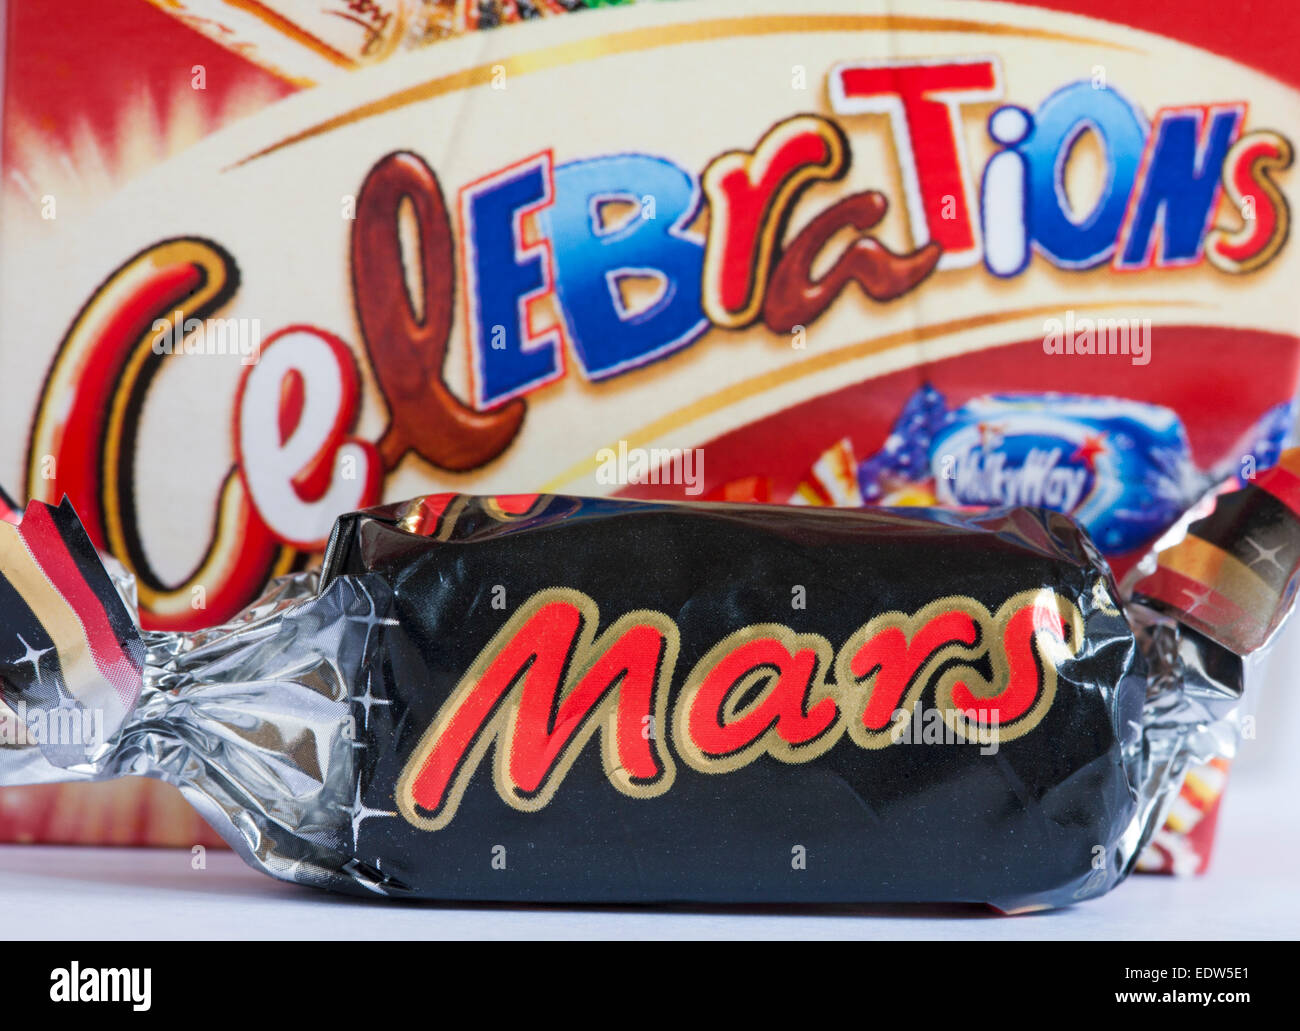 Mars chocolate removed from box of Celebrations chocolates Stock Photo